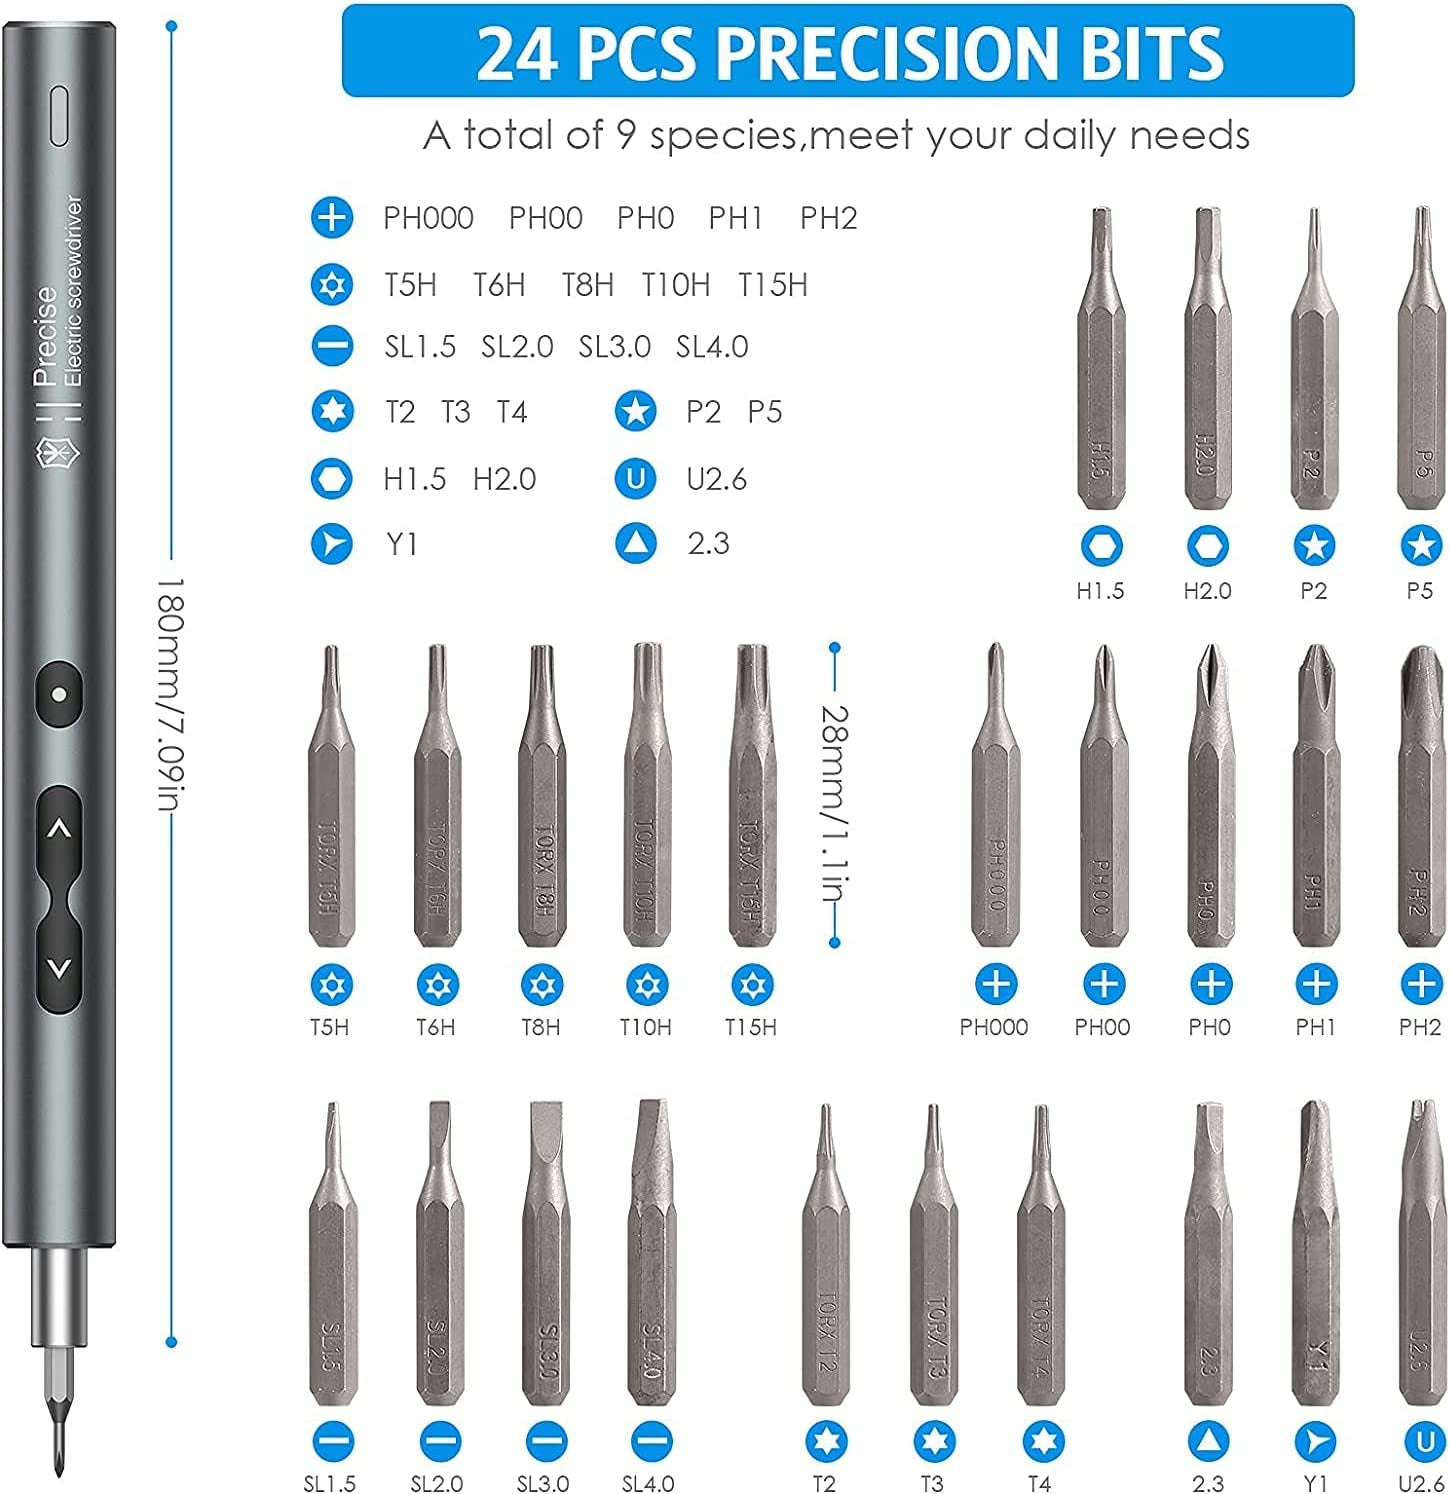 secretgreen.com.au, Electric Screwdriver, 28 in 1 Precision Screwdriver Set with 24 Bits and USB Cable, Portable Magnetic Repair Tool Kit with LED Lights for Phones Watch Jewelers Computers